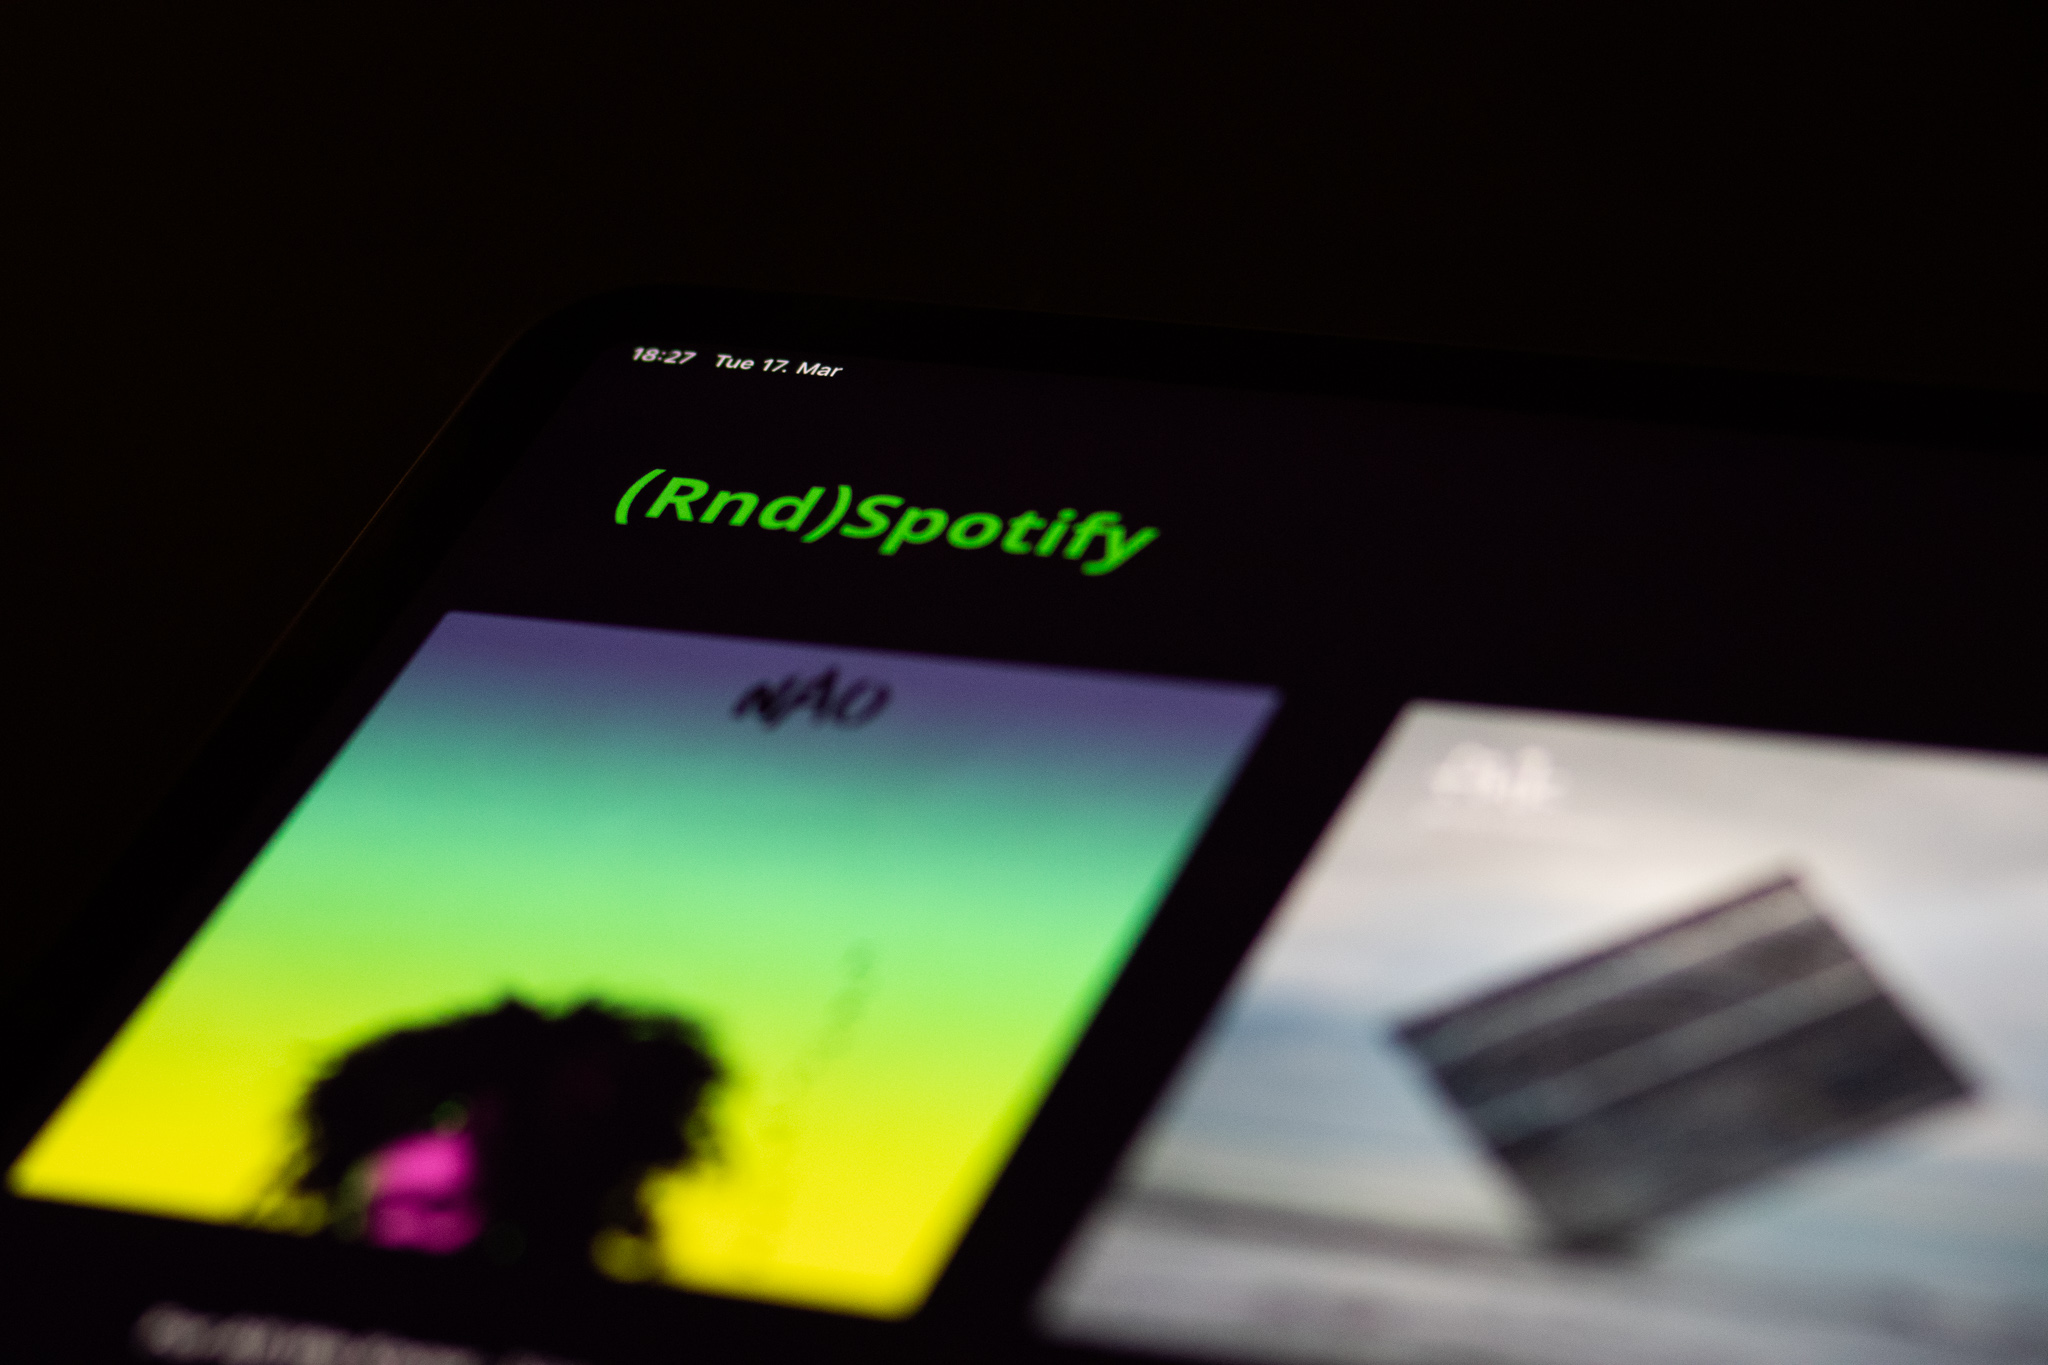 Get your saved spotify albums in a randomized order